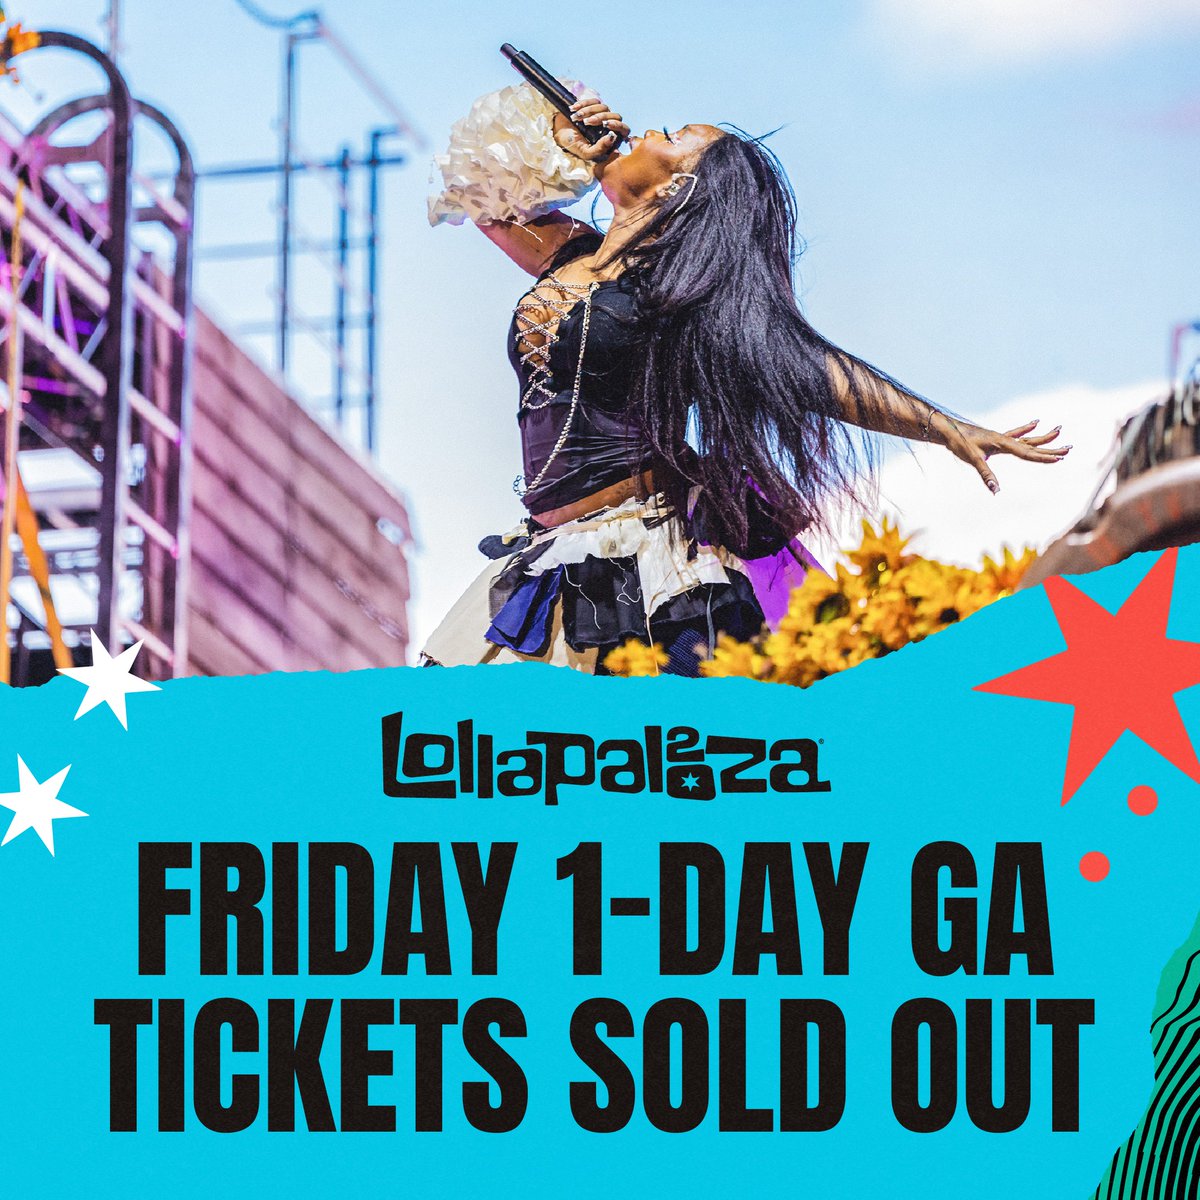 Join the waitlist now 😮‍💨 Thursday, Saturday, and Sunday GA remain... but won't last forever lollapalooza.com